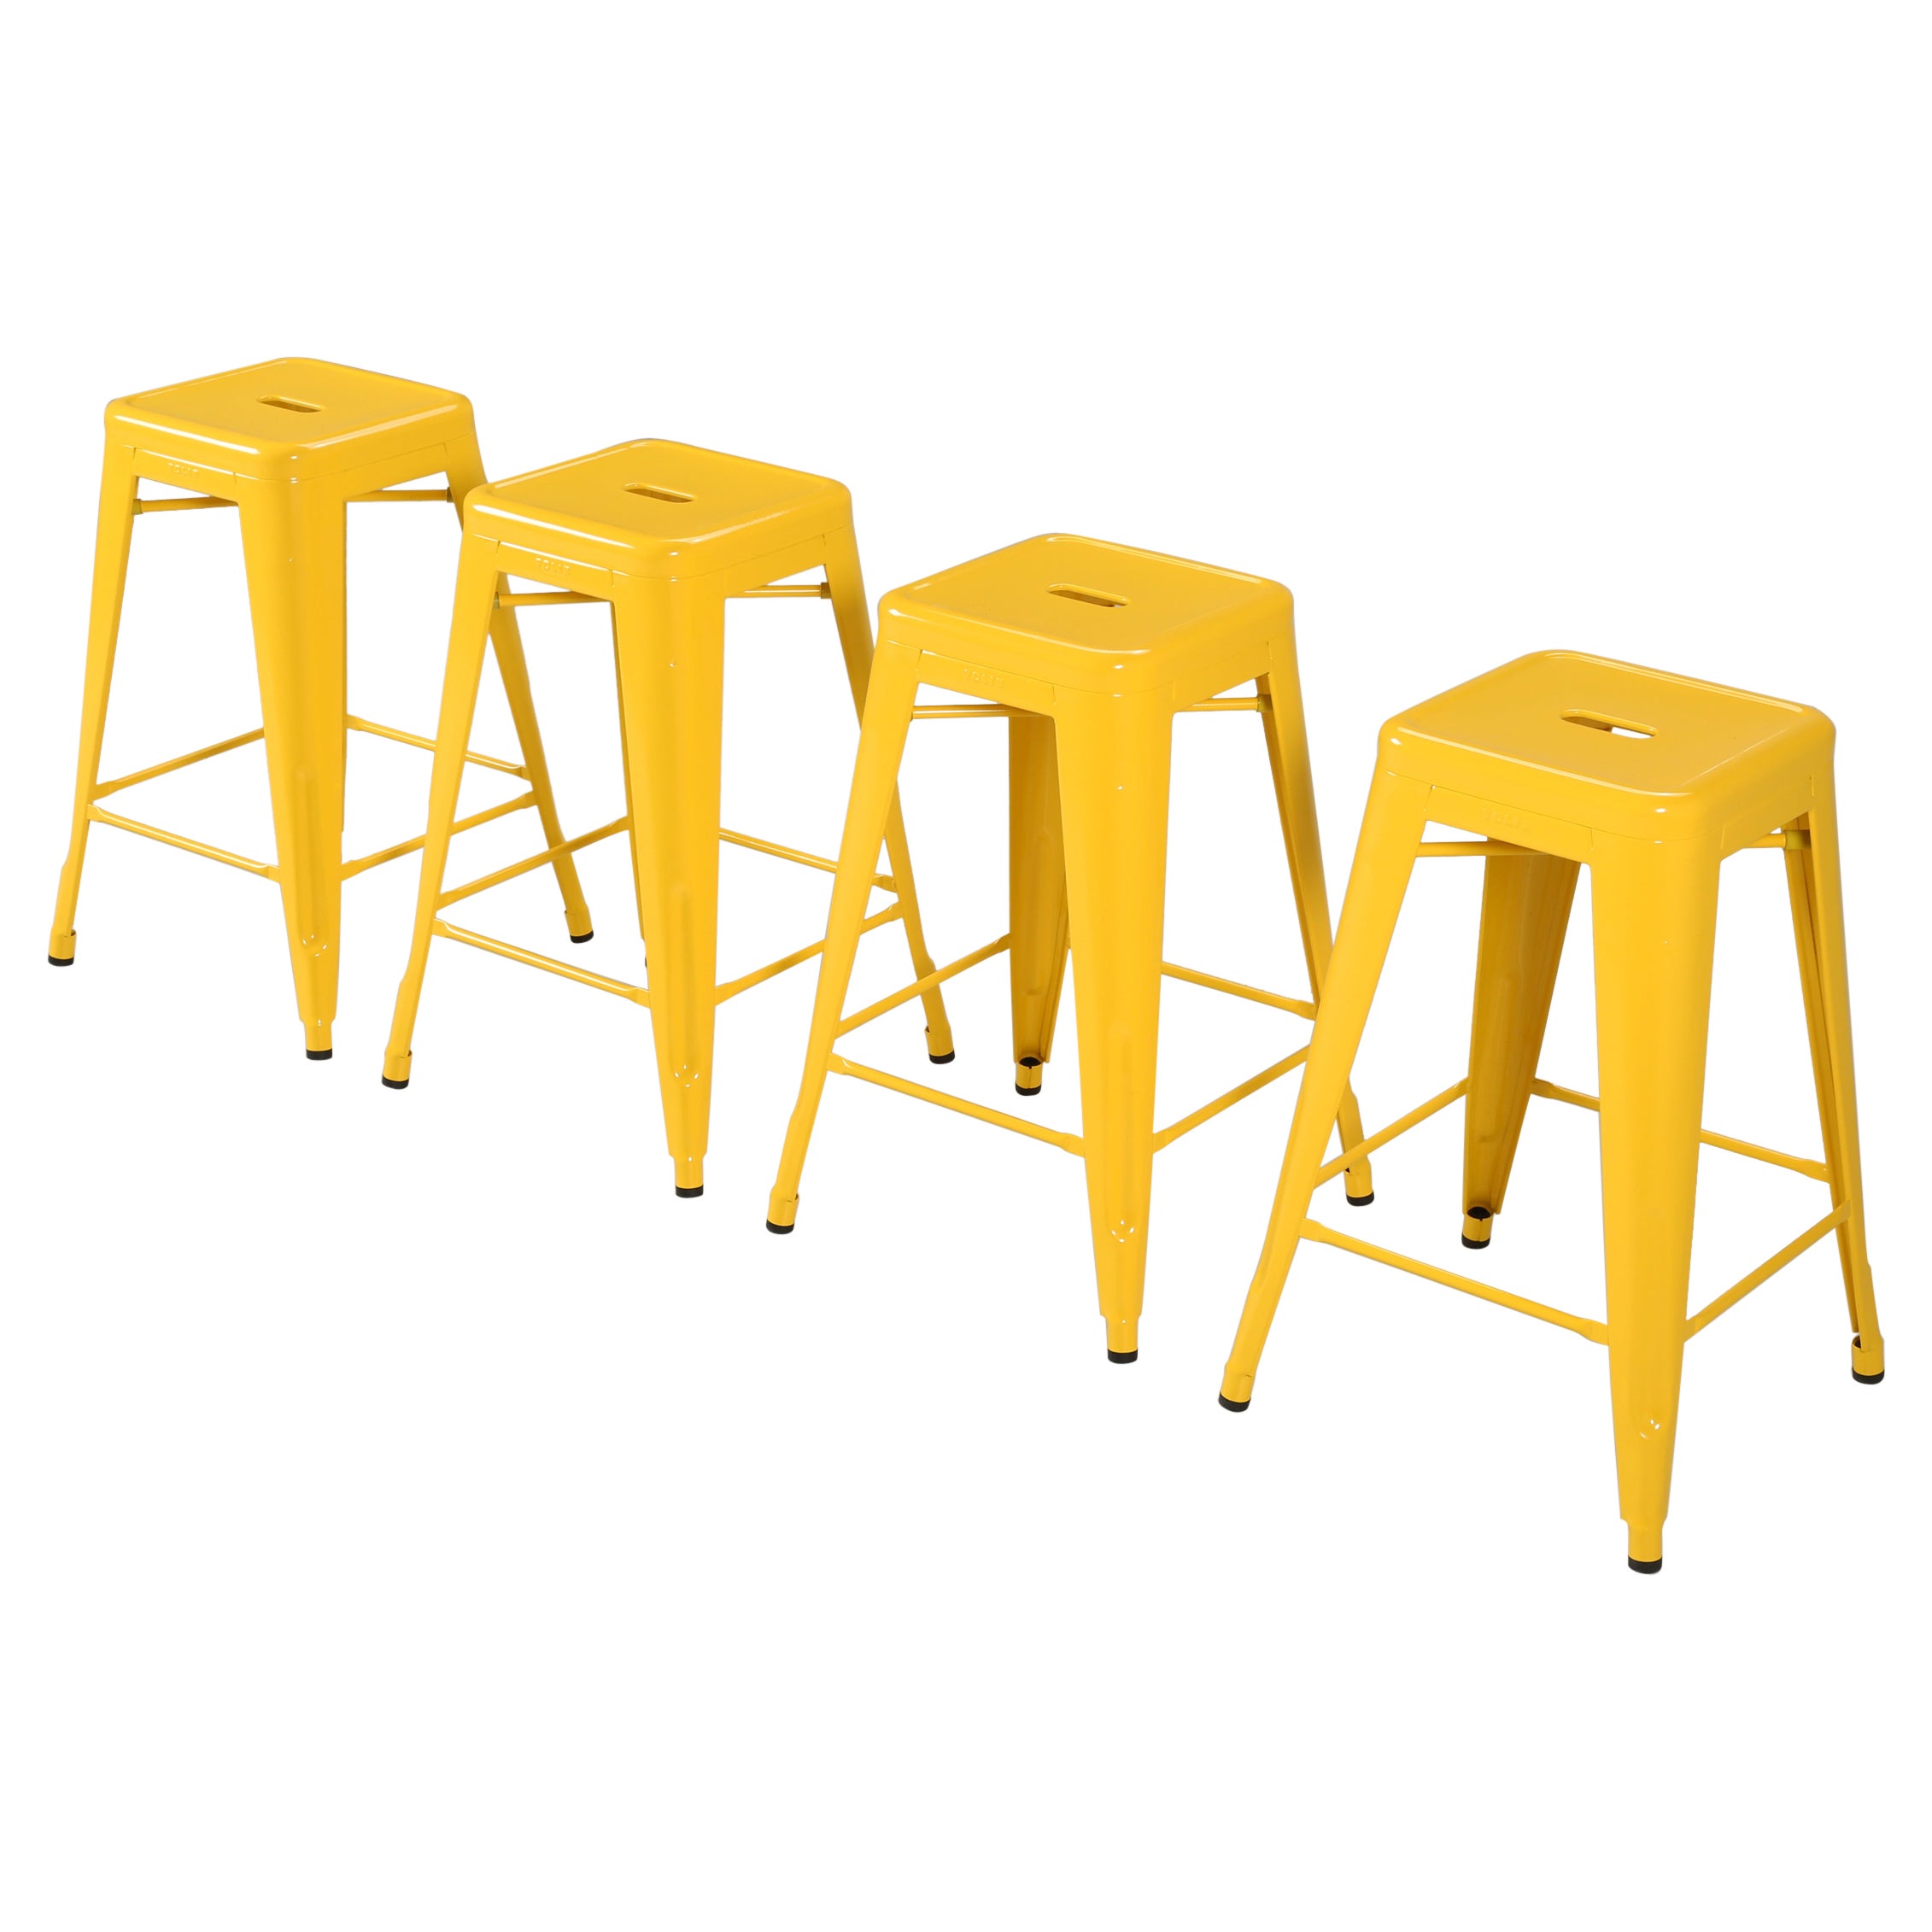 Tolix Made in France Steel Stacking Stools 100's in Stock, Most Colors Available For Sale